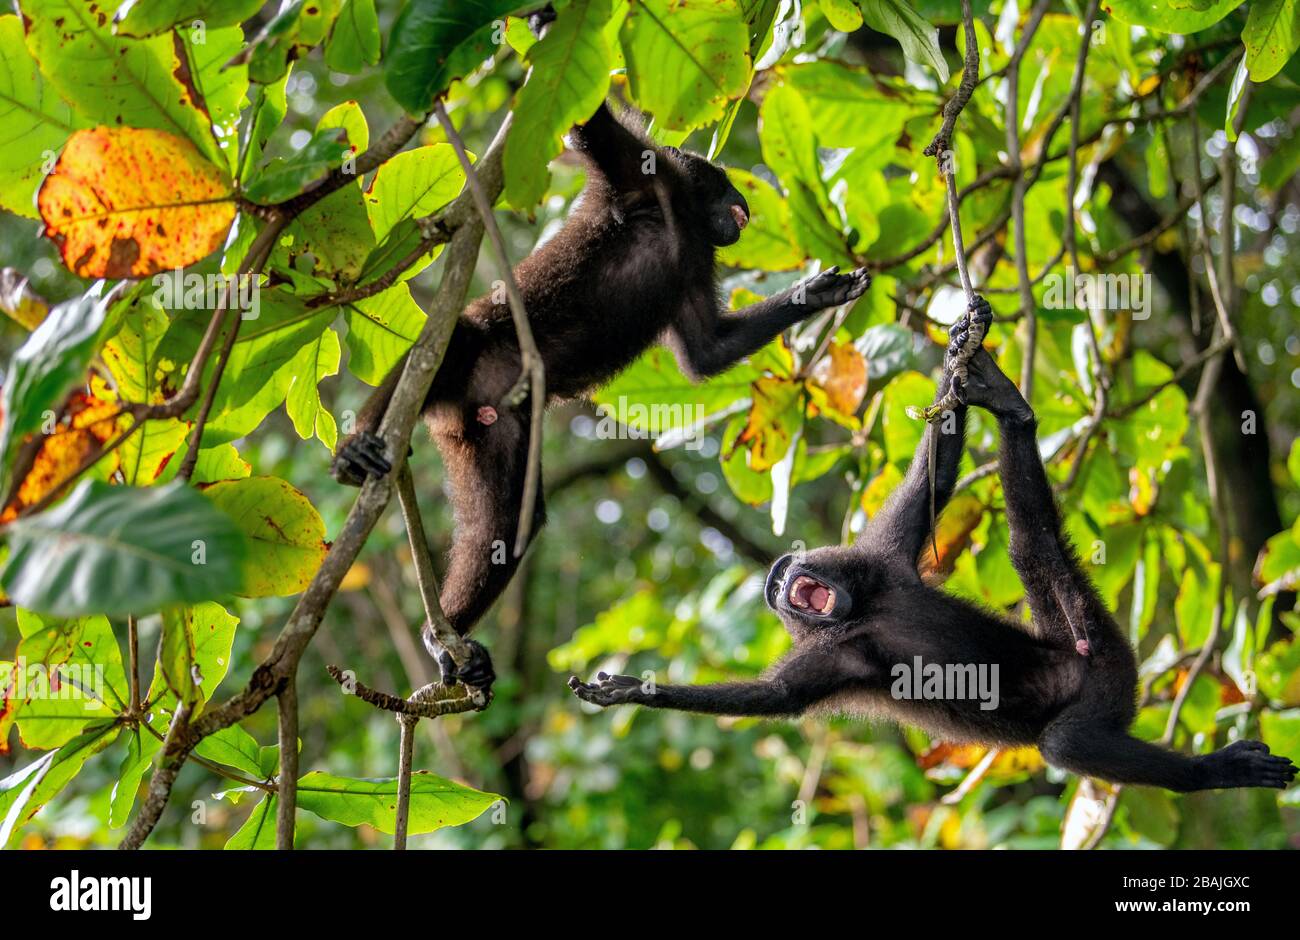 The Celebes crested macaques on the tree. Crested black macaque, Sulawesi crested macaque, sulawesi macaque or the black ape. Natural habitat. Sulawes Stock Photo